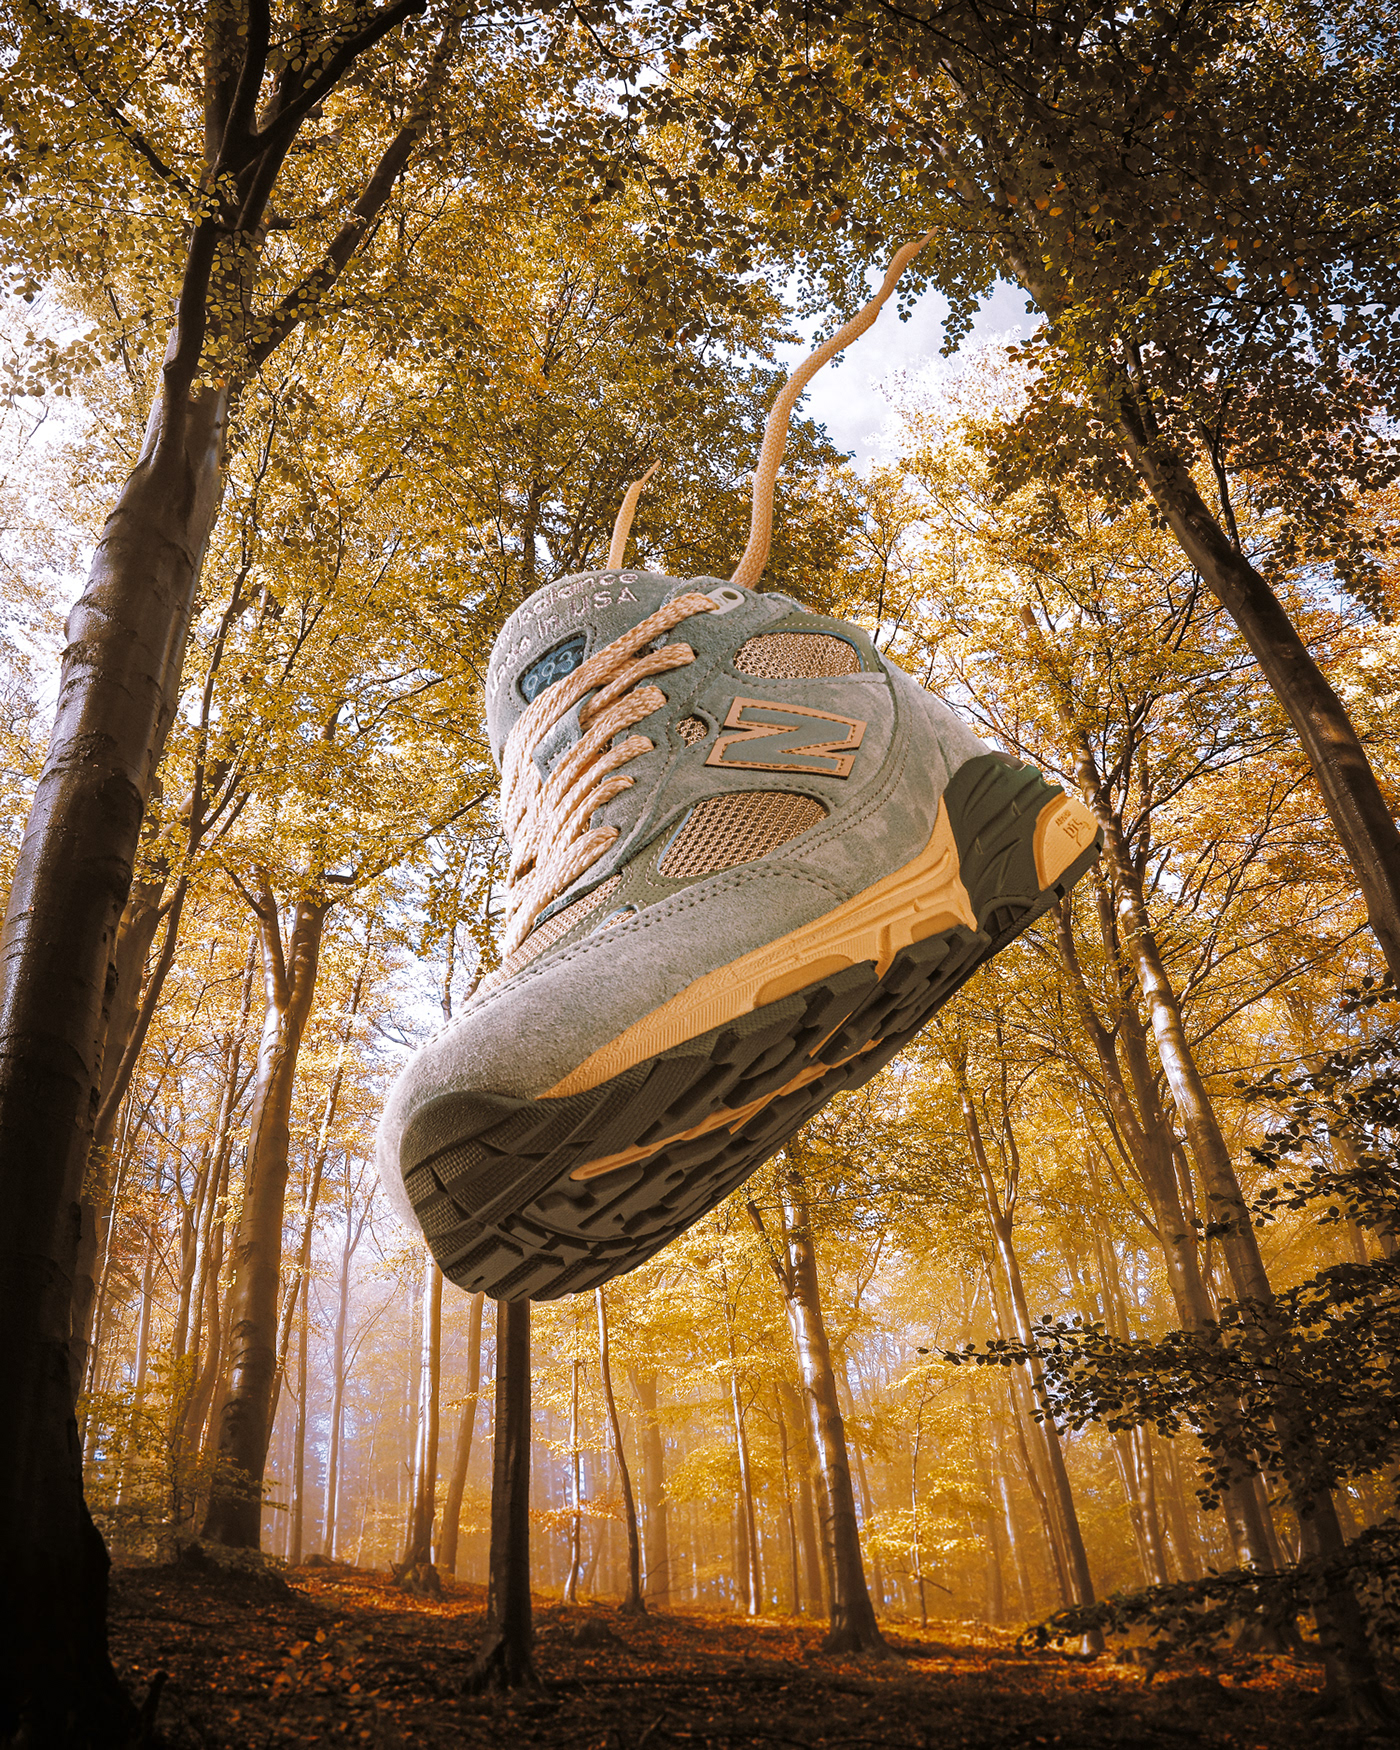 Giant sneaker photo composite in the forest . Retouching using Photoshop